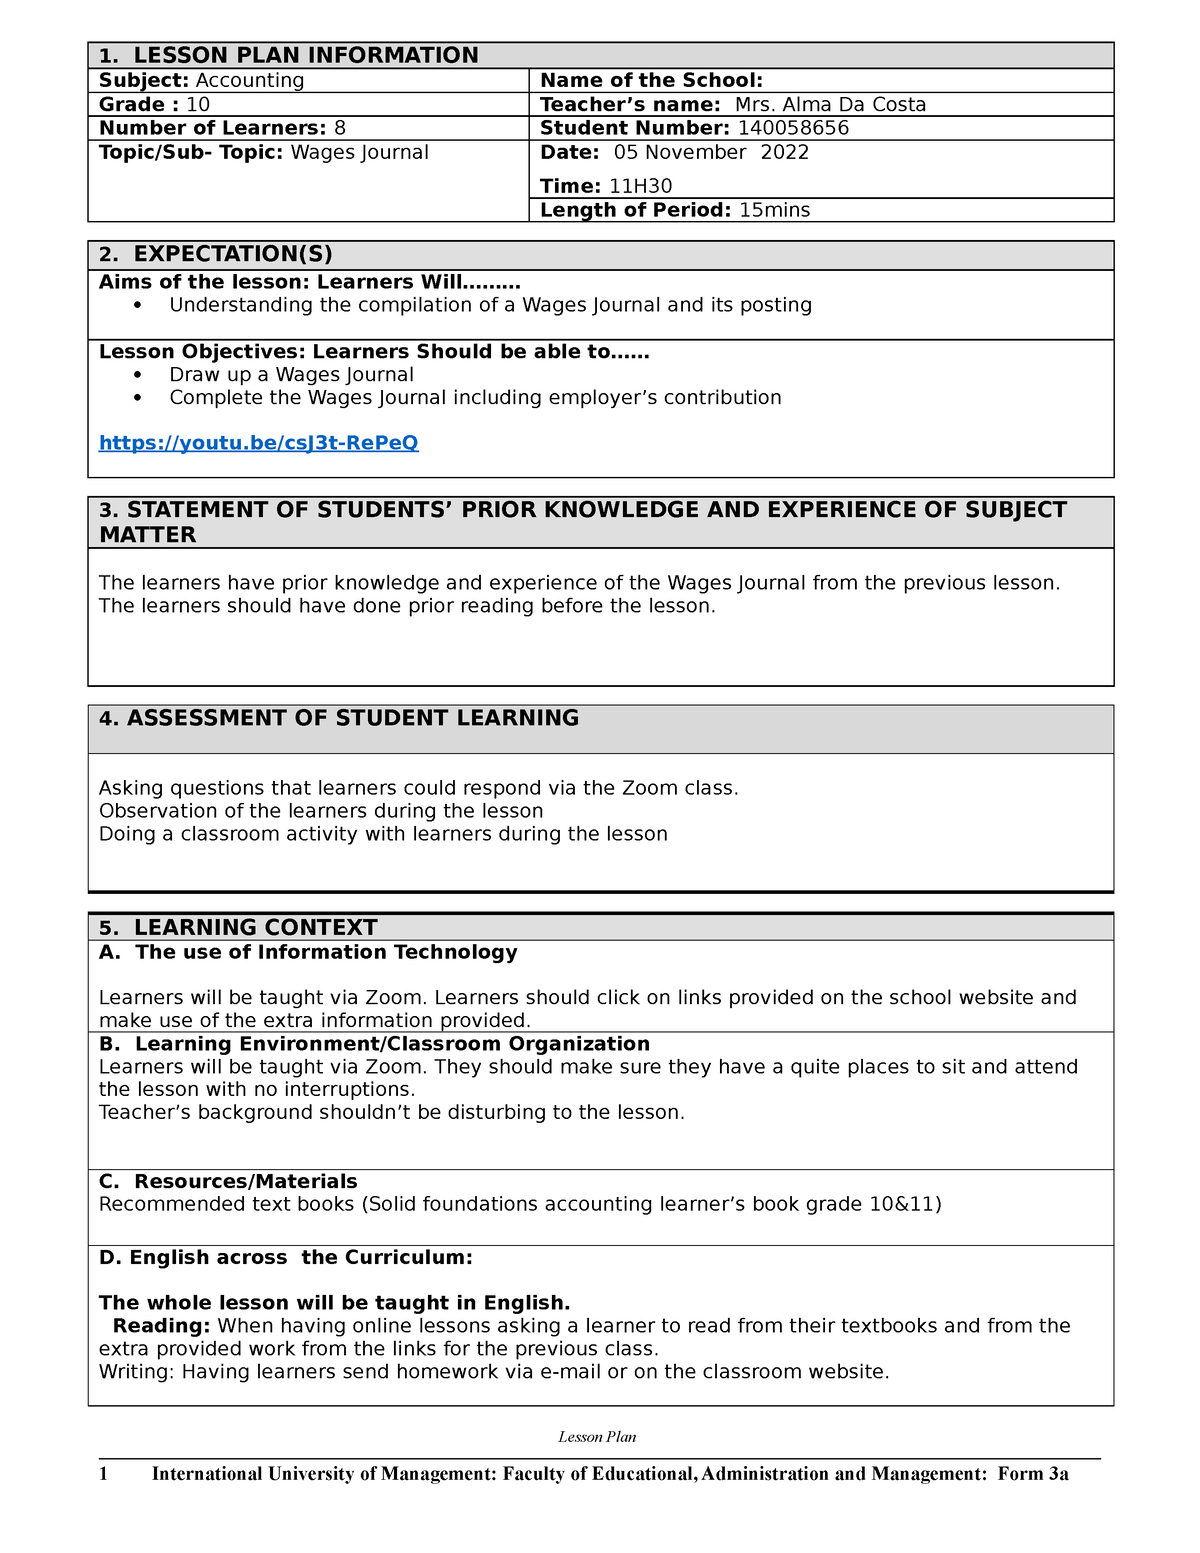 Lesson Plan Template for IUM Accounting Grade 10 1 LESSON PLAN